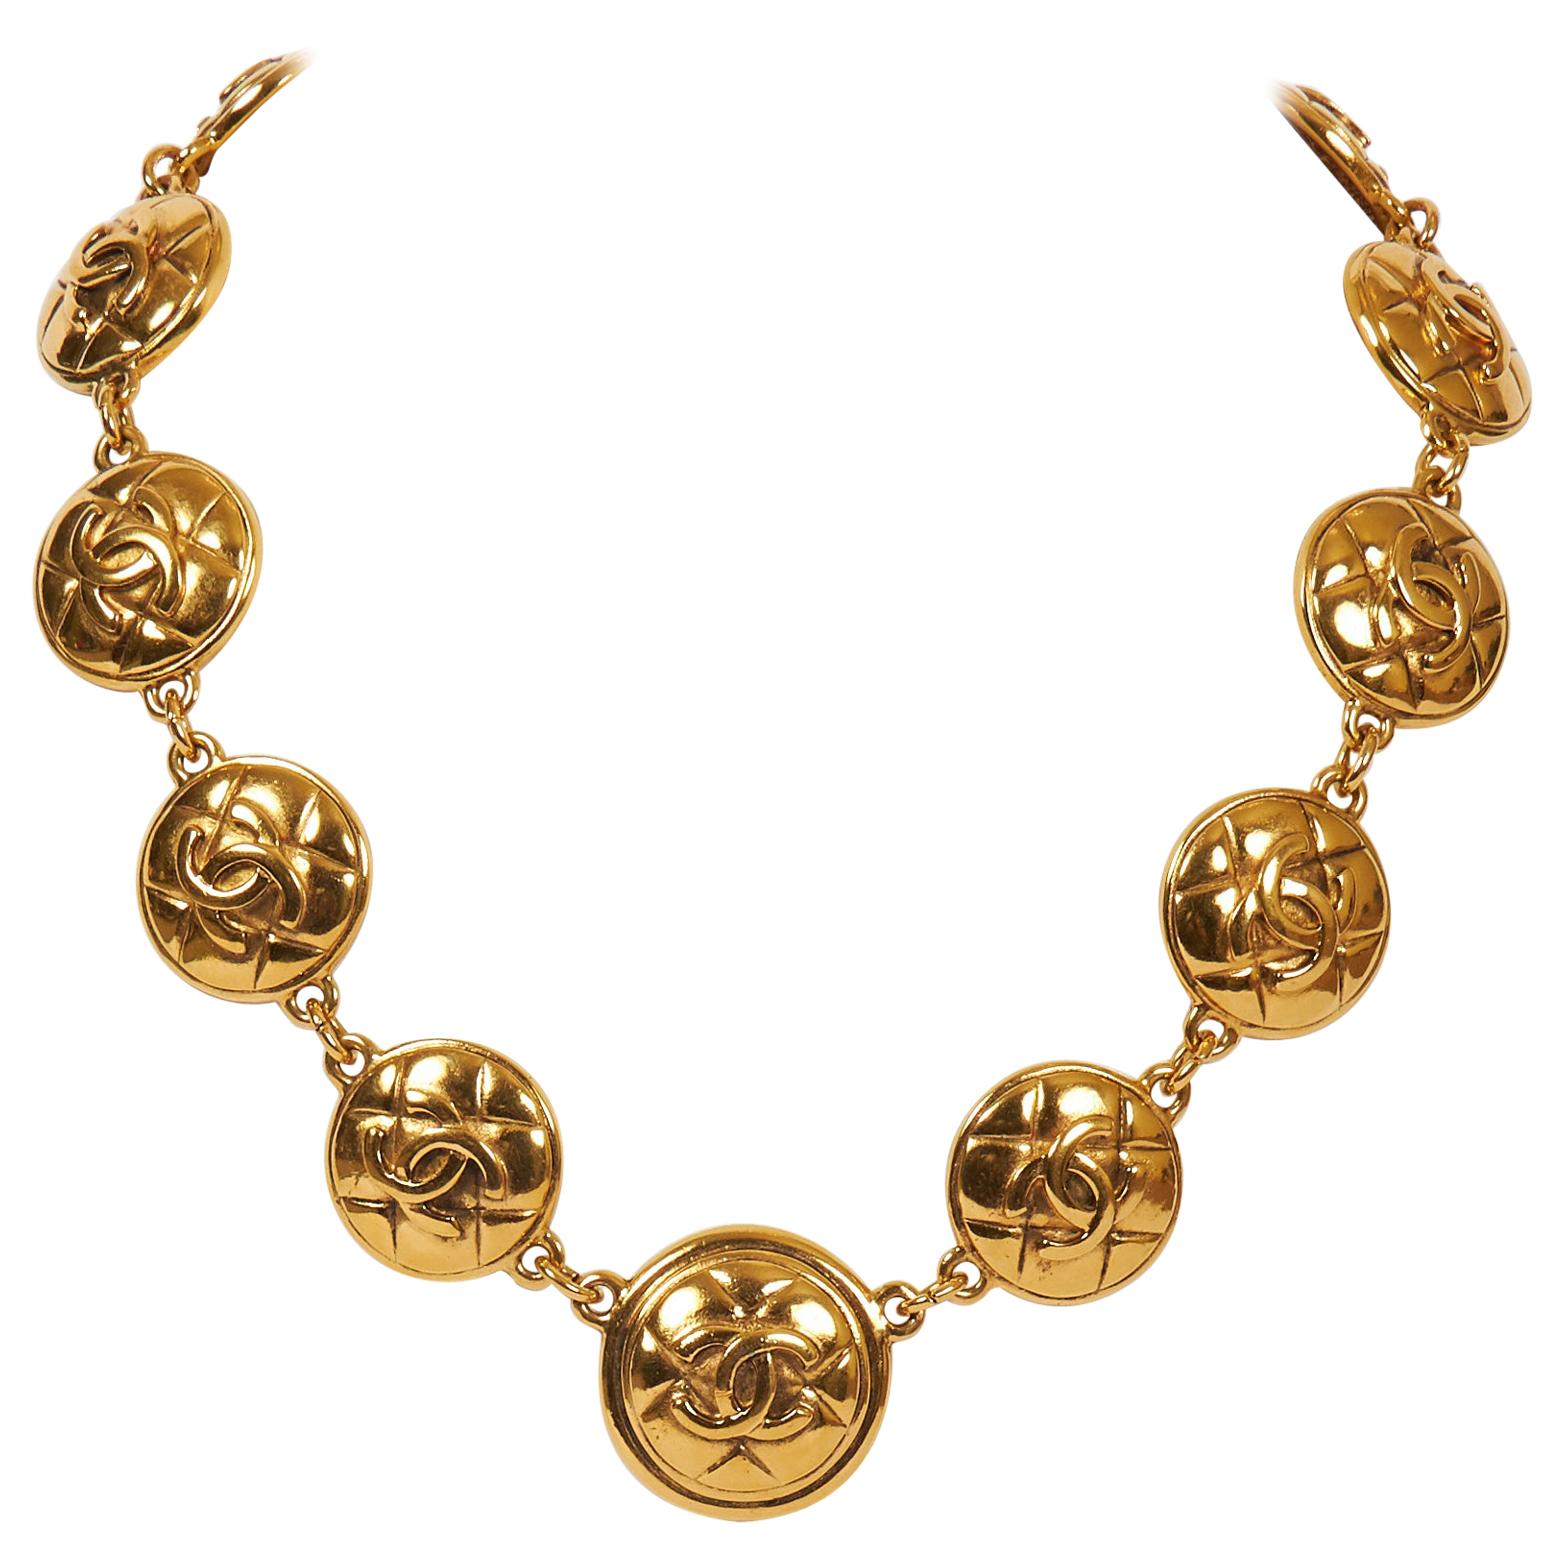 1980s Chanel Gold Quilted Choker Necklace